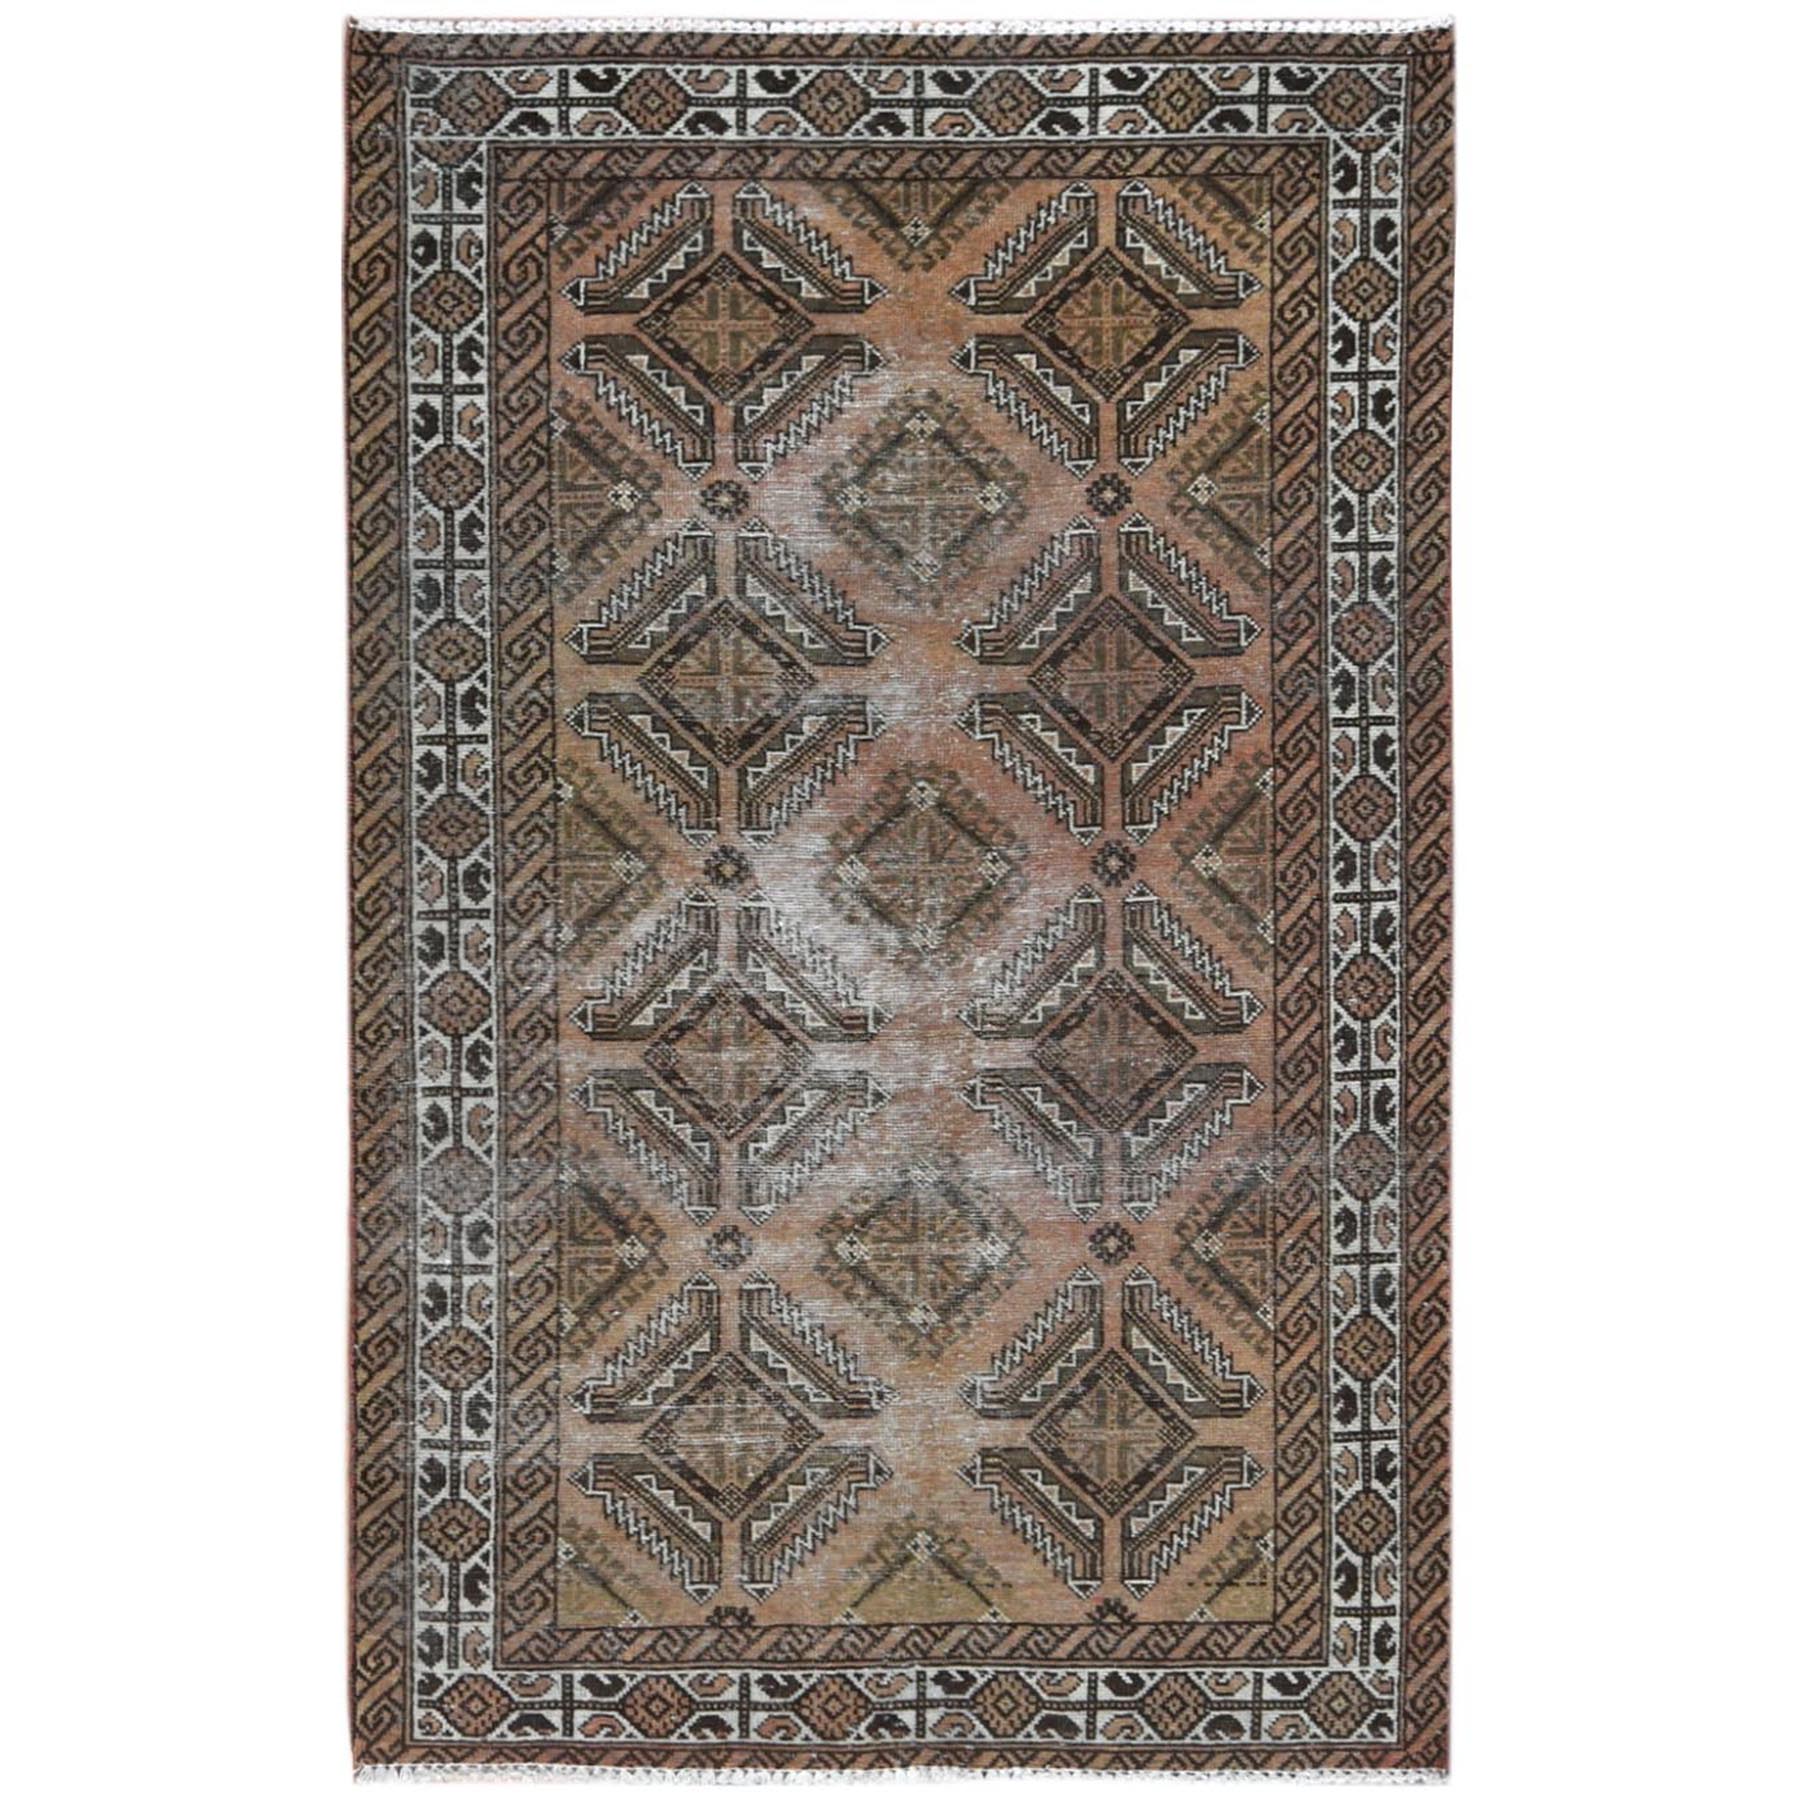 4'x6'4" Chocolate Brown, Vintage Persian Baluch Sheared Low, Distressed Look Worn Wool Hand Woven, Oriental Rug 